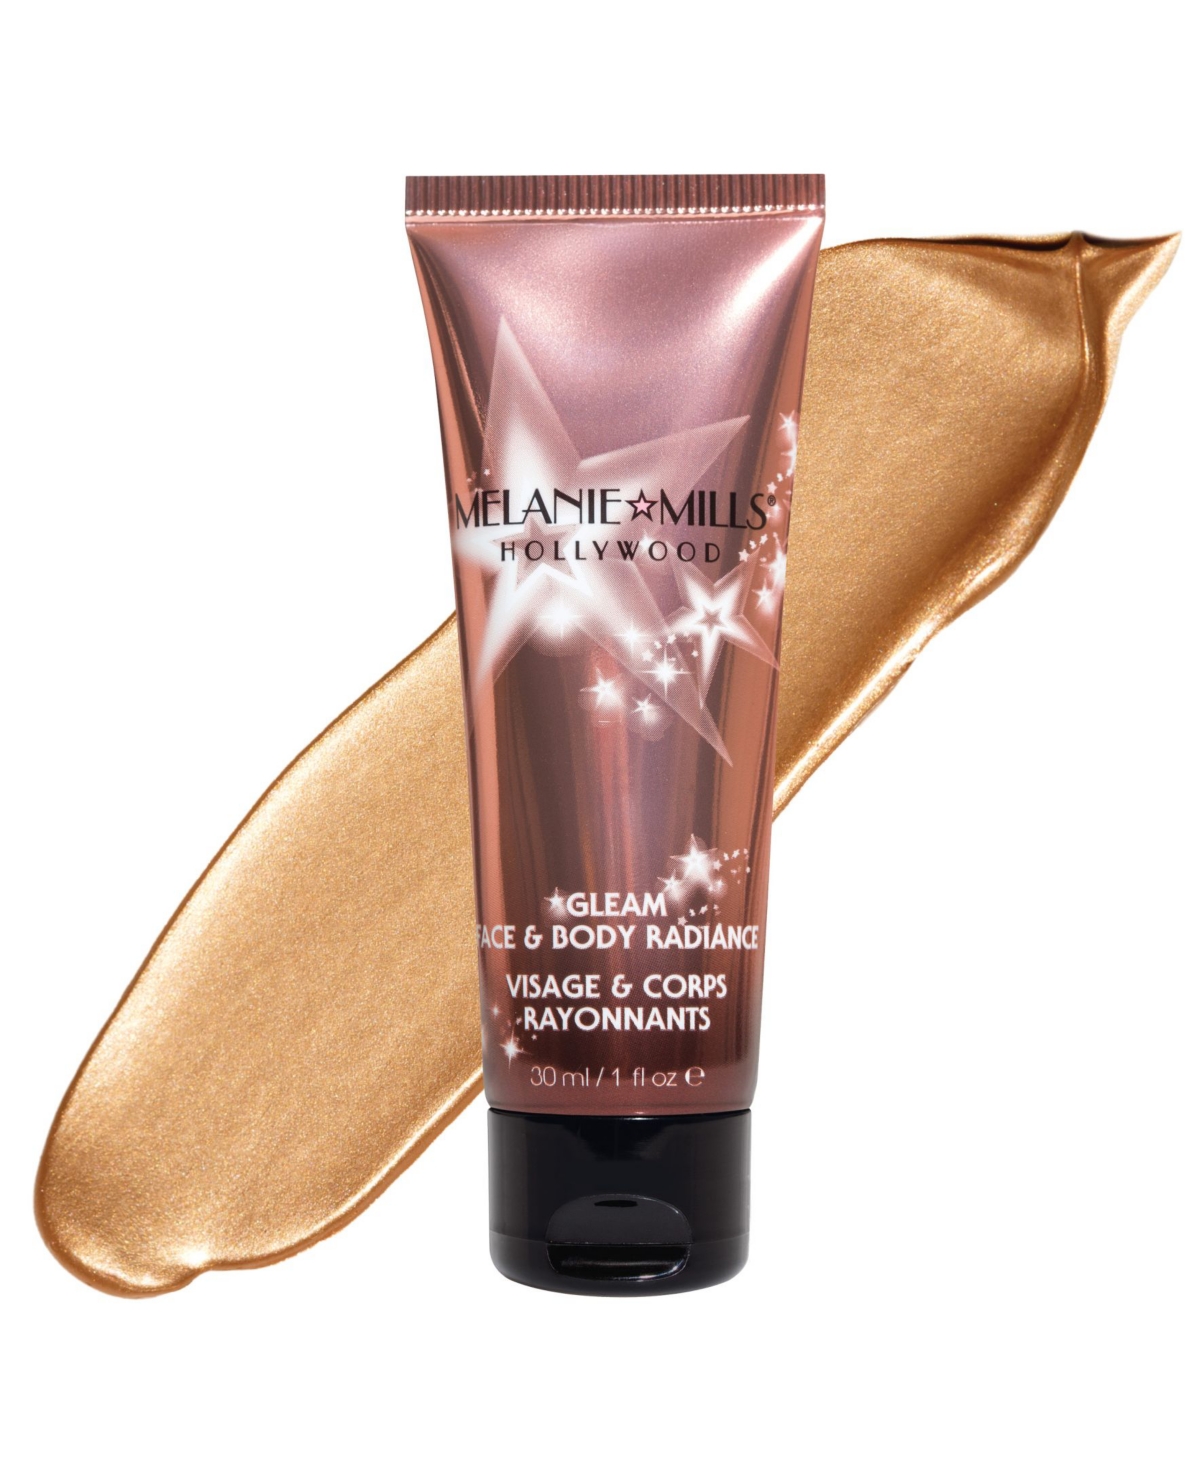 Gleam Face and Body Radiance All in One Makeup, Moisturizer and Glow, 1 oz - Peach Deluxe